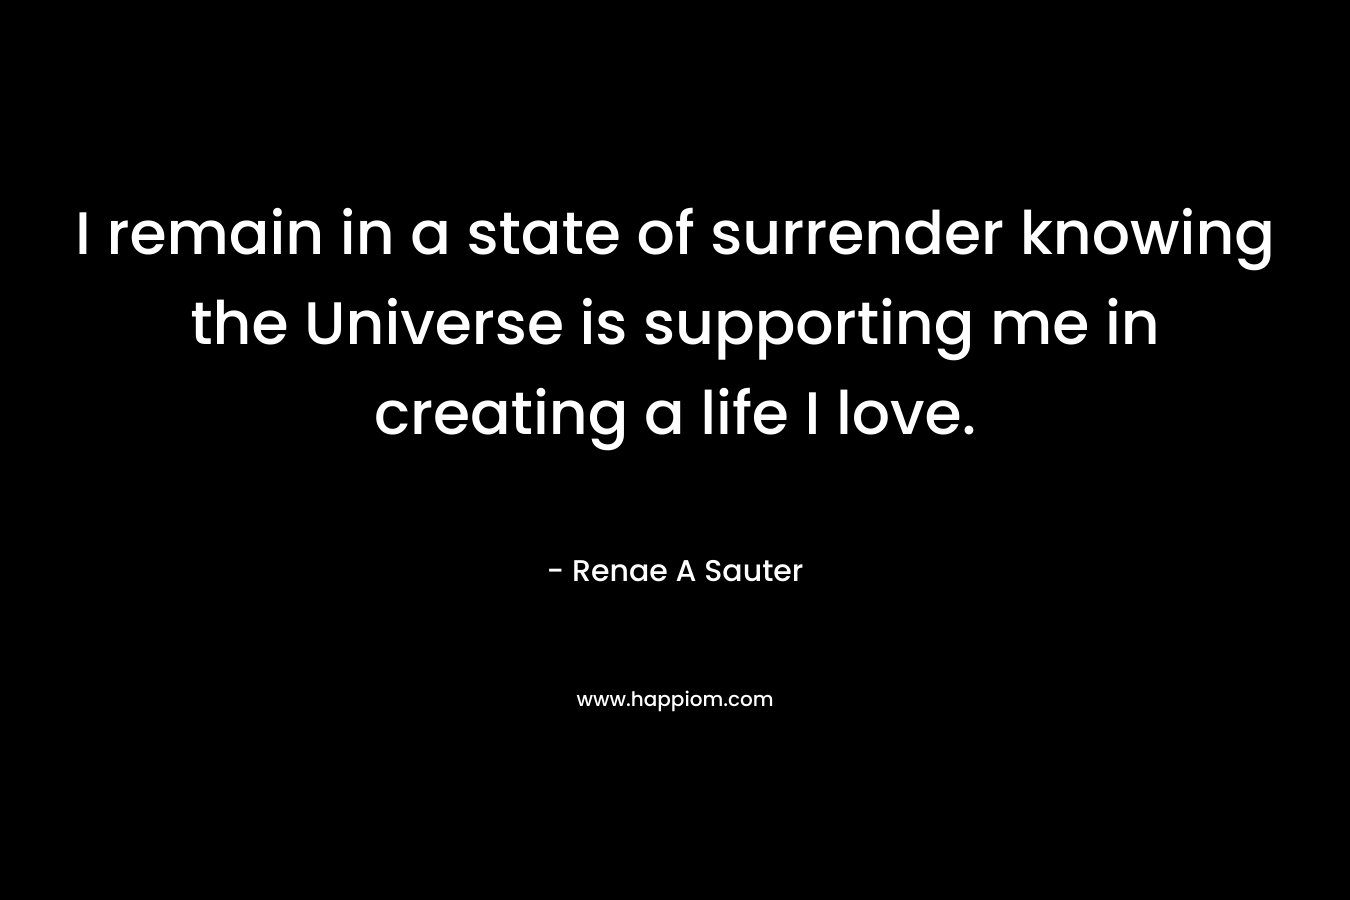 I remain in a state of surrender knowing the Universe is supporting me in creating a life I love.